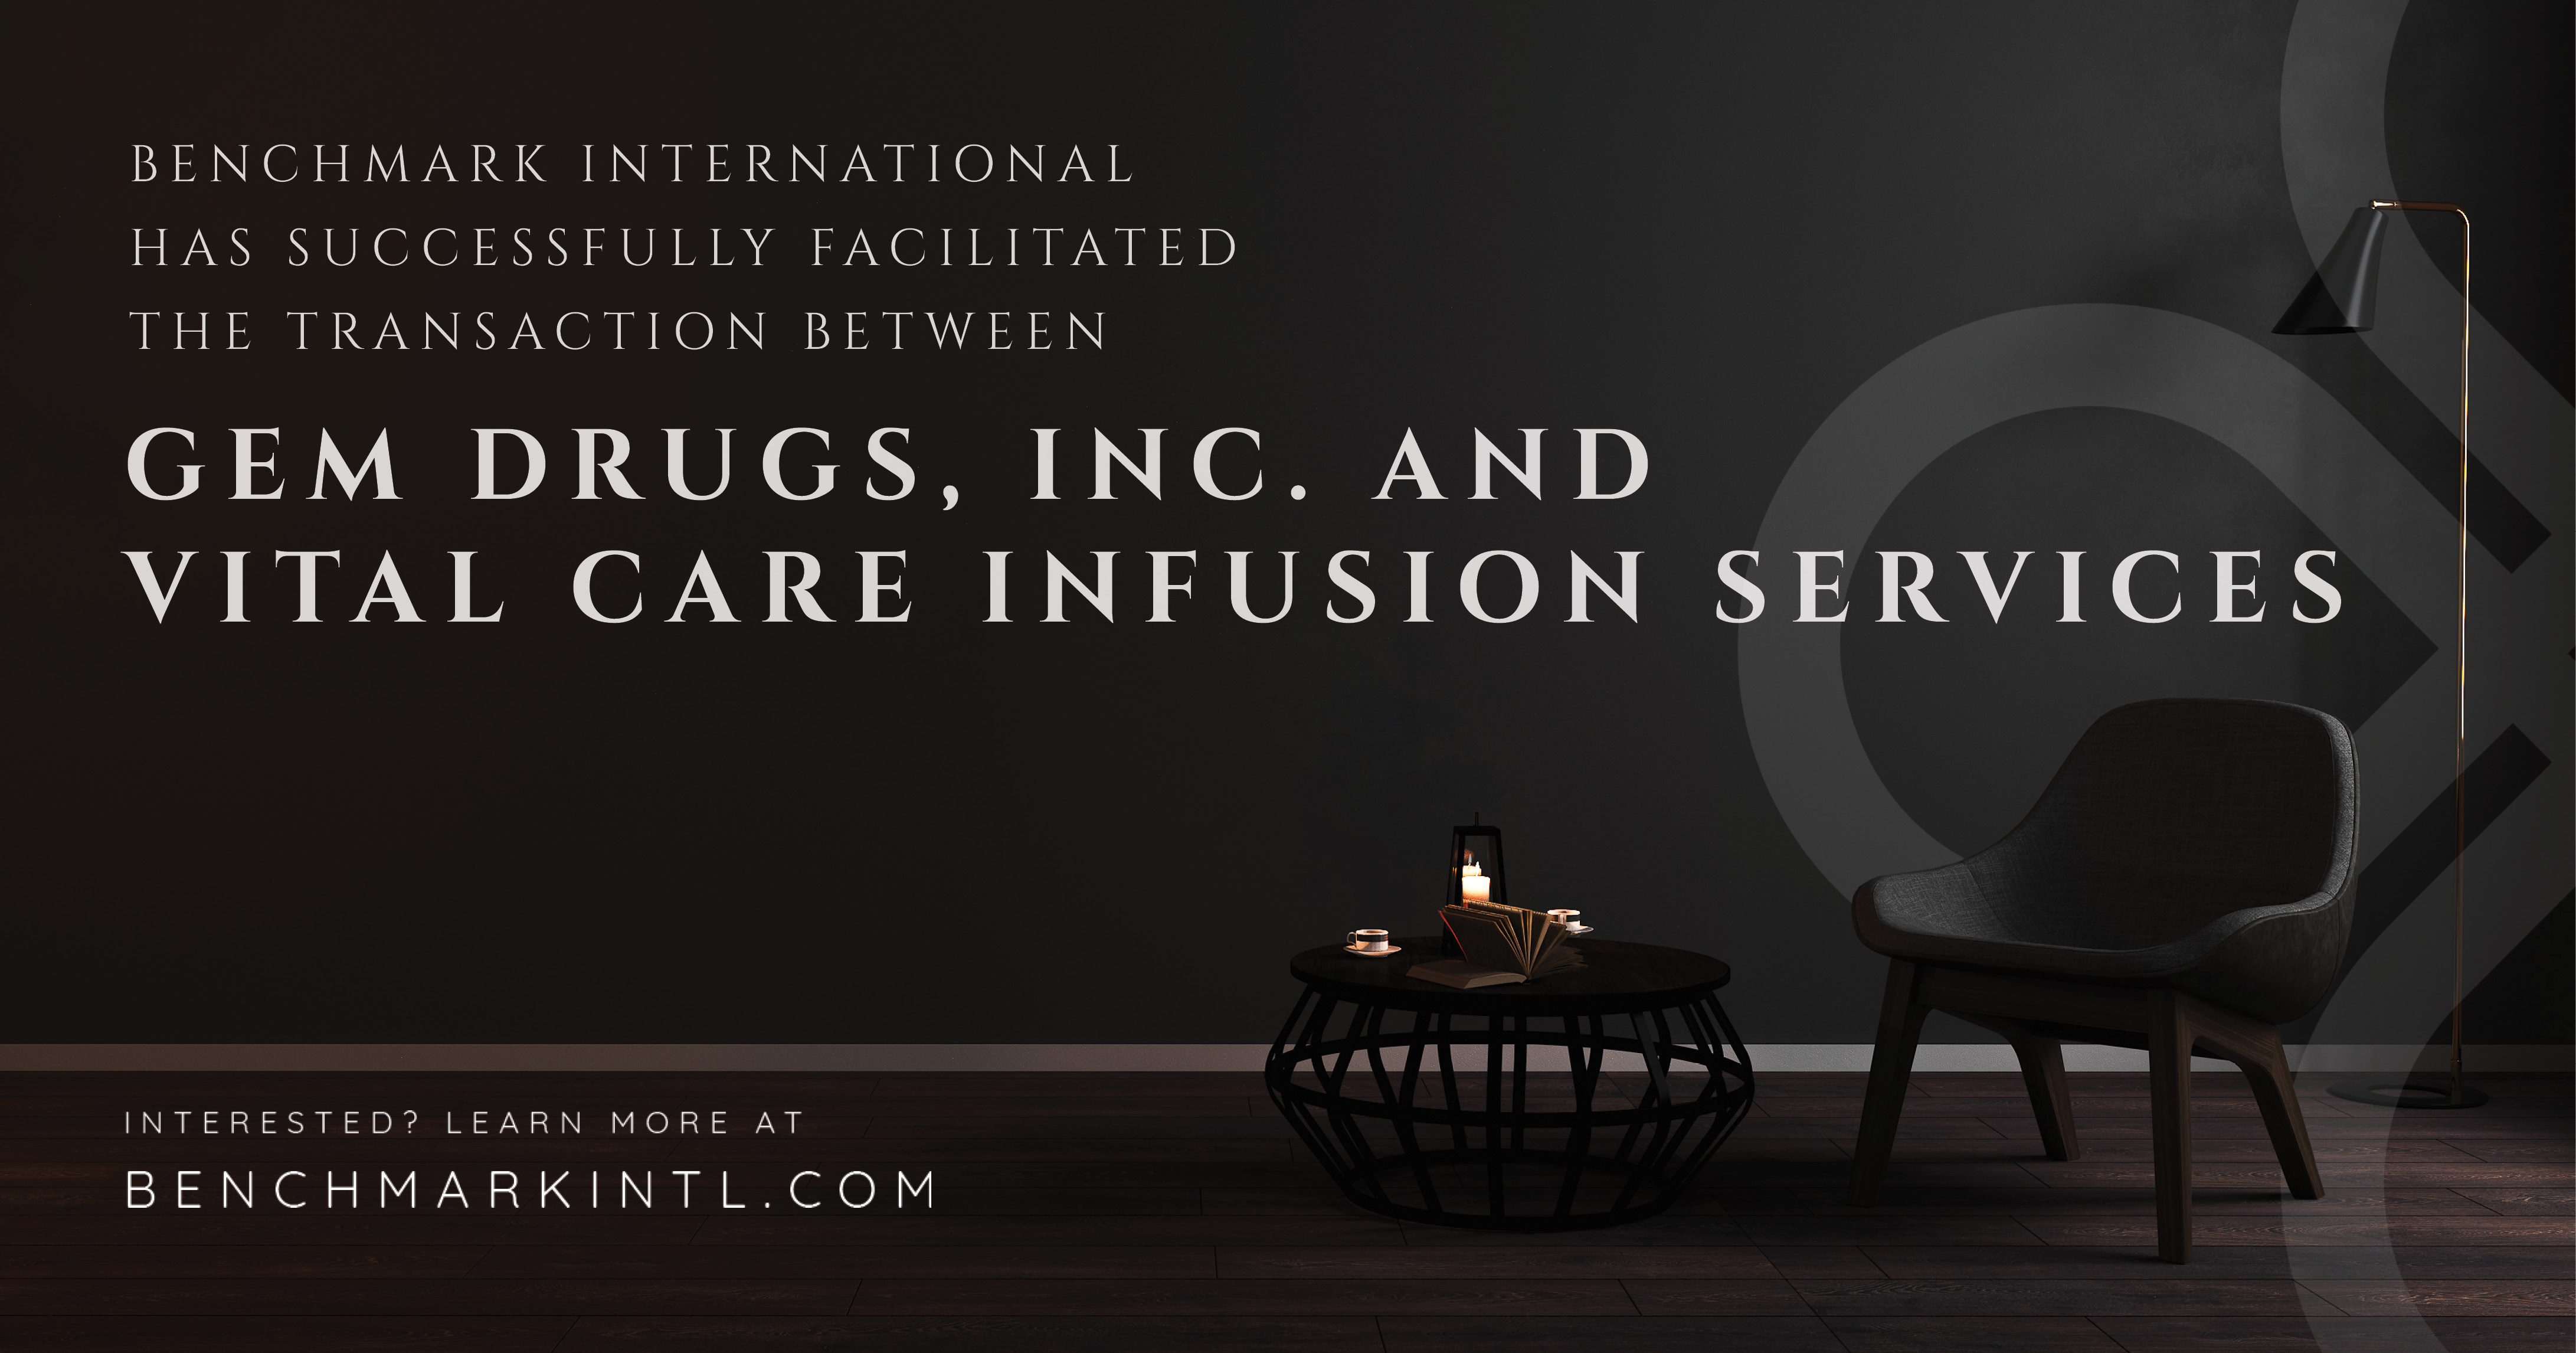 Benchmark International Facilitated the Transaction Between Gem Drugs, Inc. and Vital Care Infusion Services